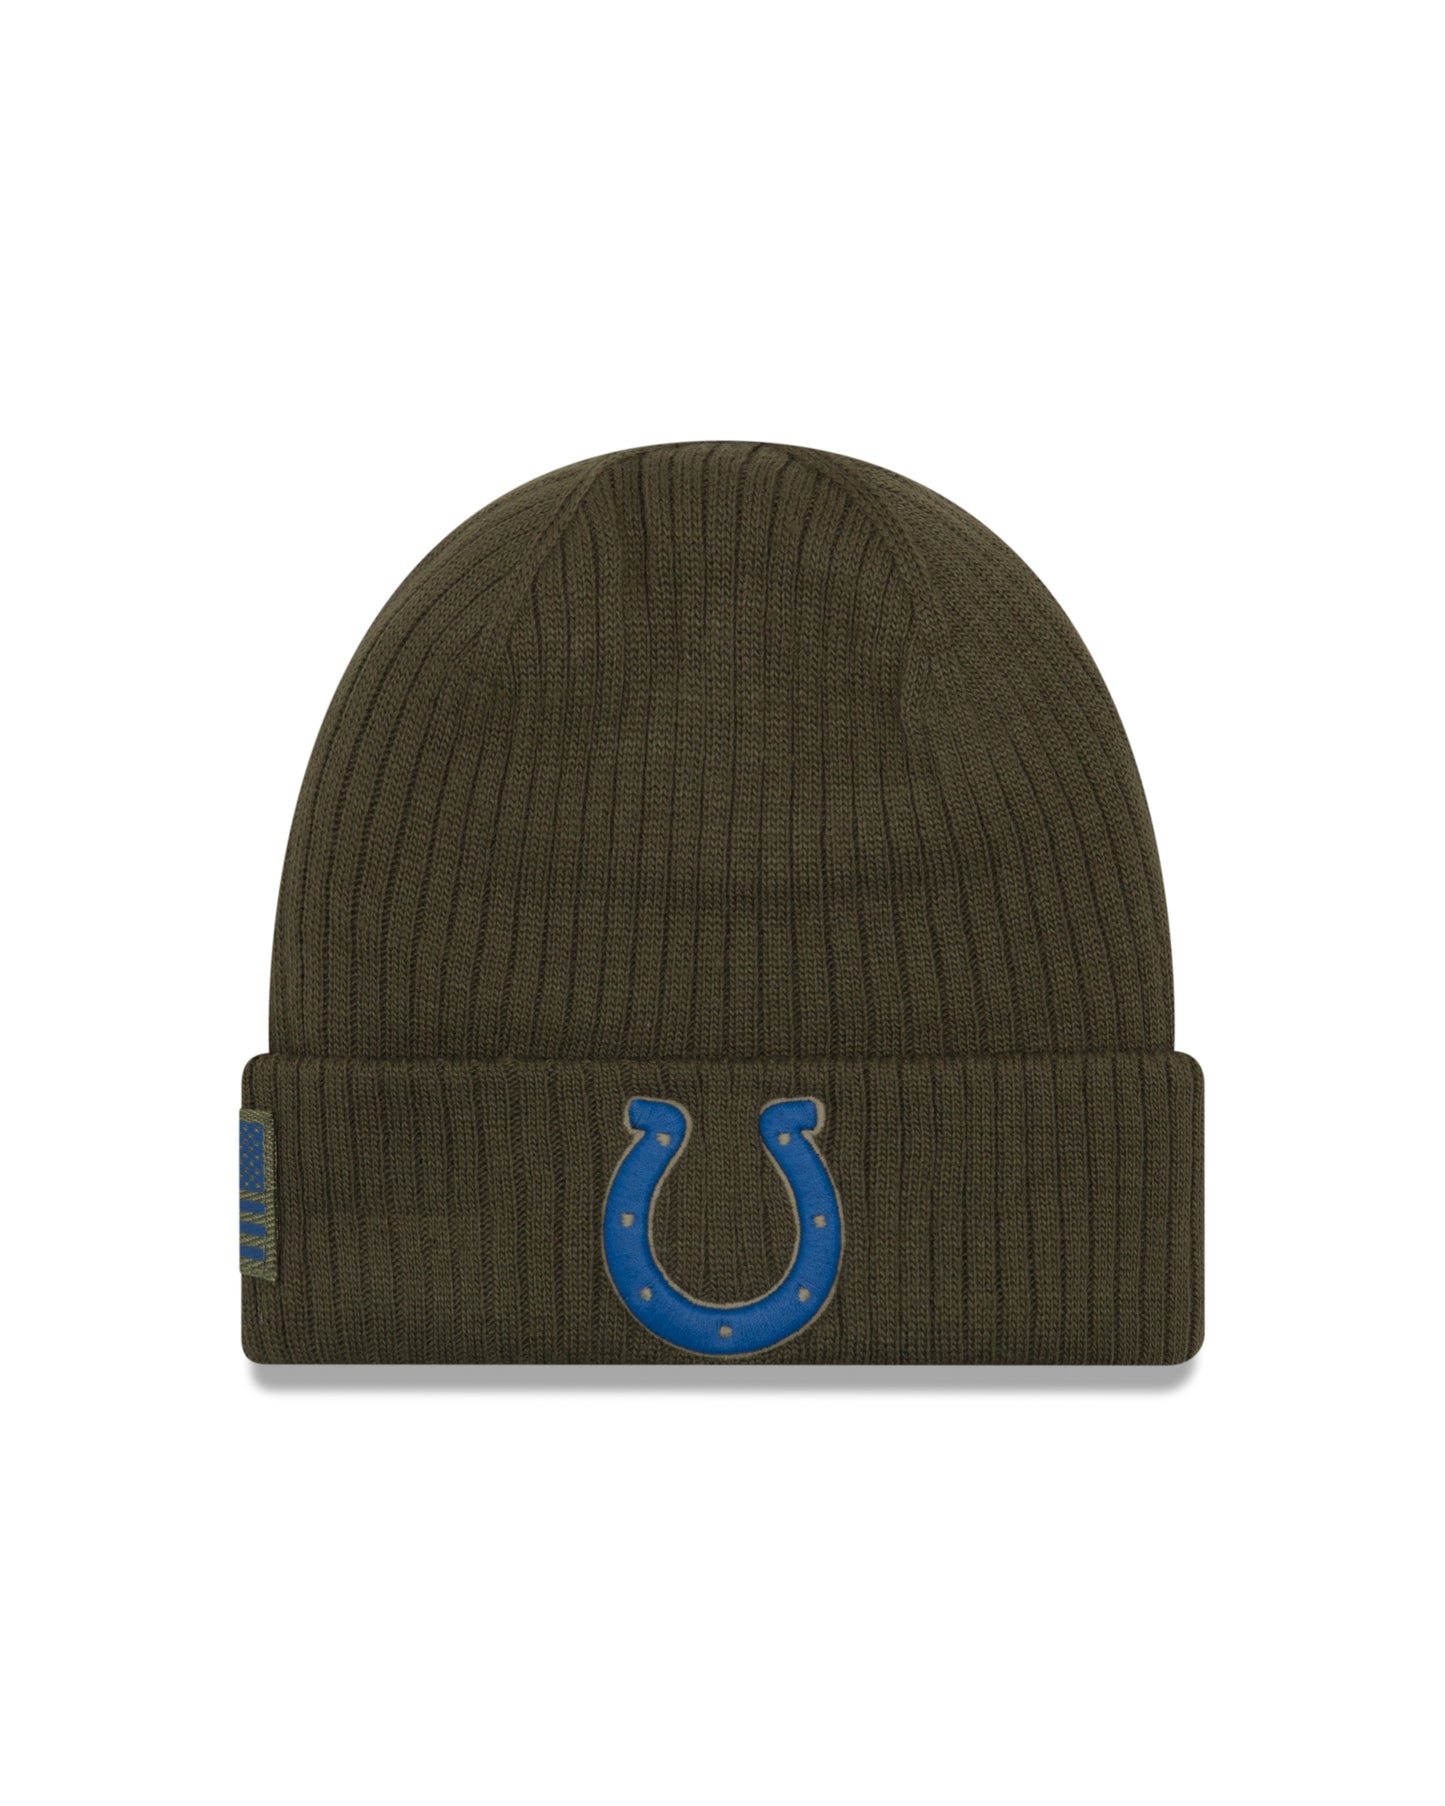 Indianapolis Colts New Era 2018 Salute To Service Sideline Knit Hat - Olive